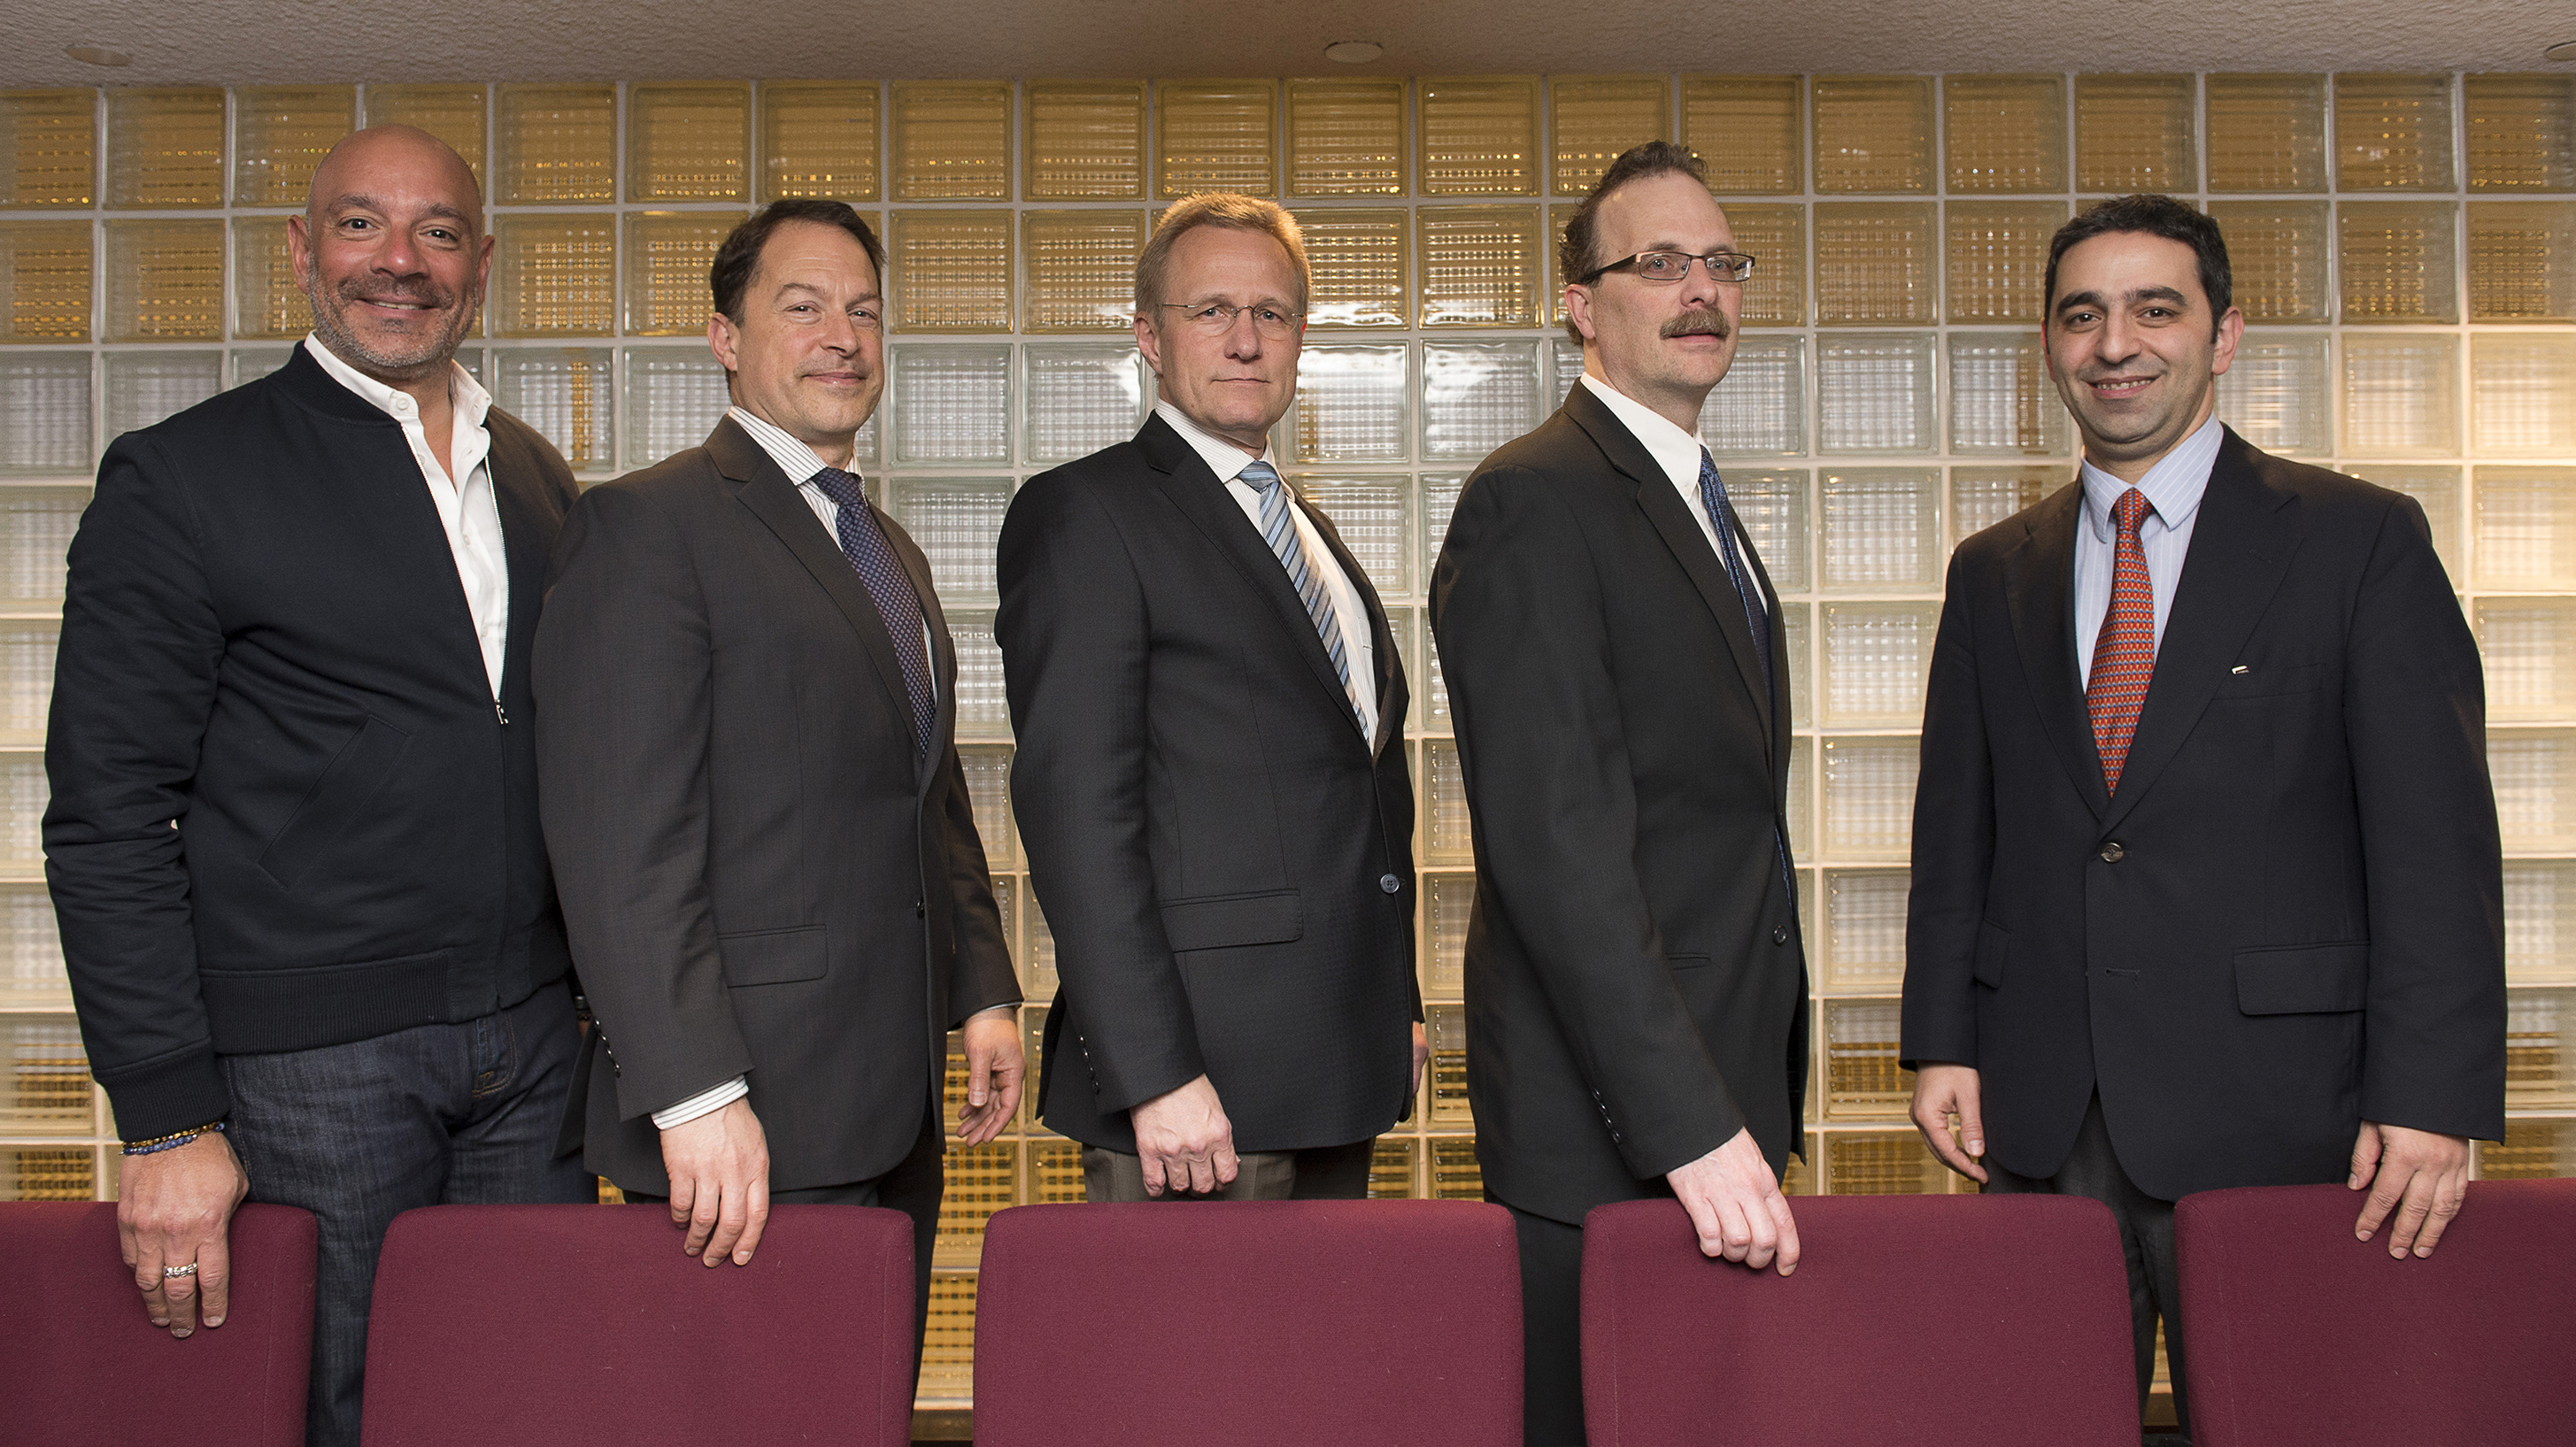 From left to right: Dr. Zahi A. Fayad, Dr. Craig Levin, Dr. Norbert Avril, Dr. Raymond F. Muzic Jr. and Dr. Georges El Fakhri